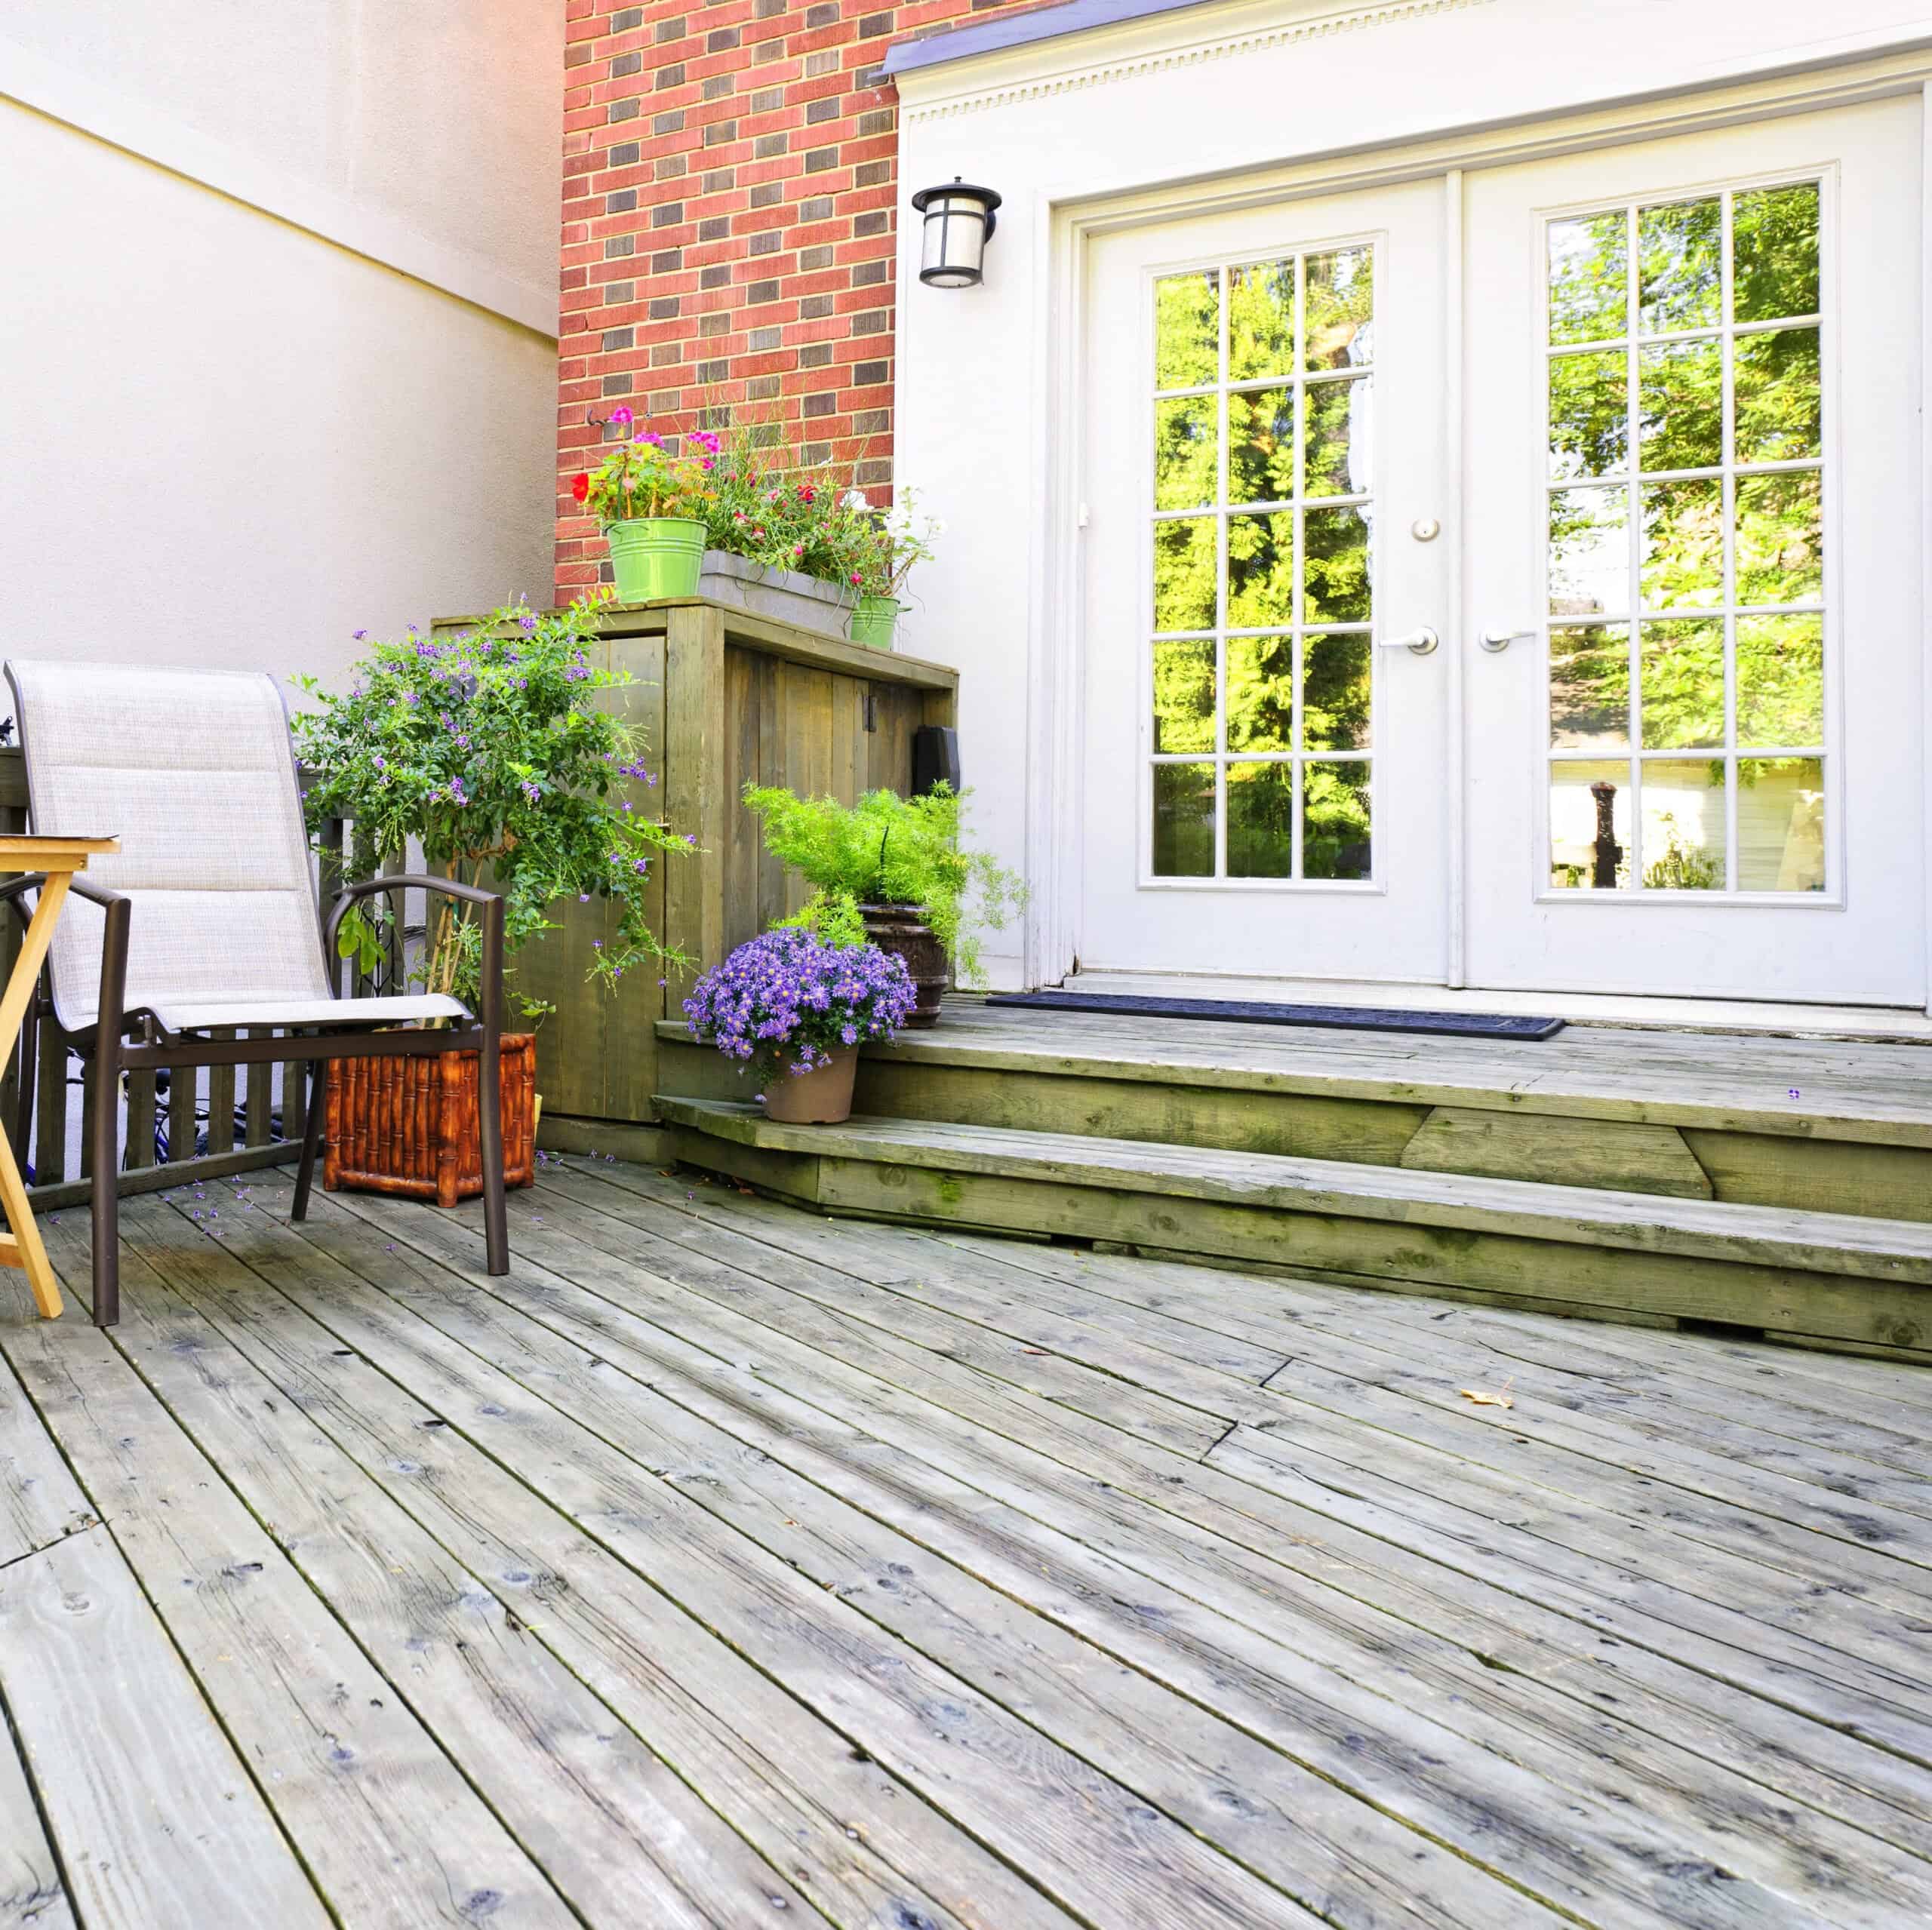 Will an Outdoor Rug Damage a Wood Deck?